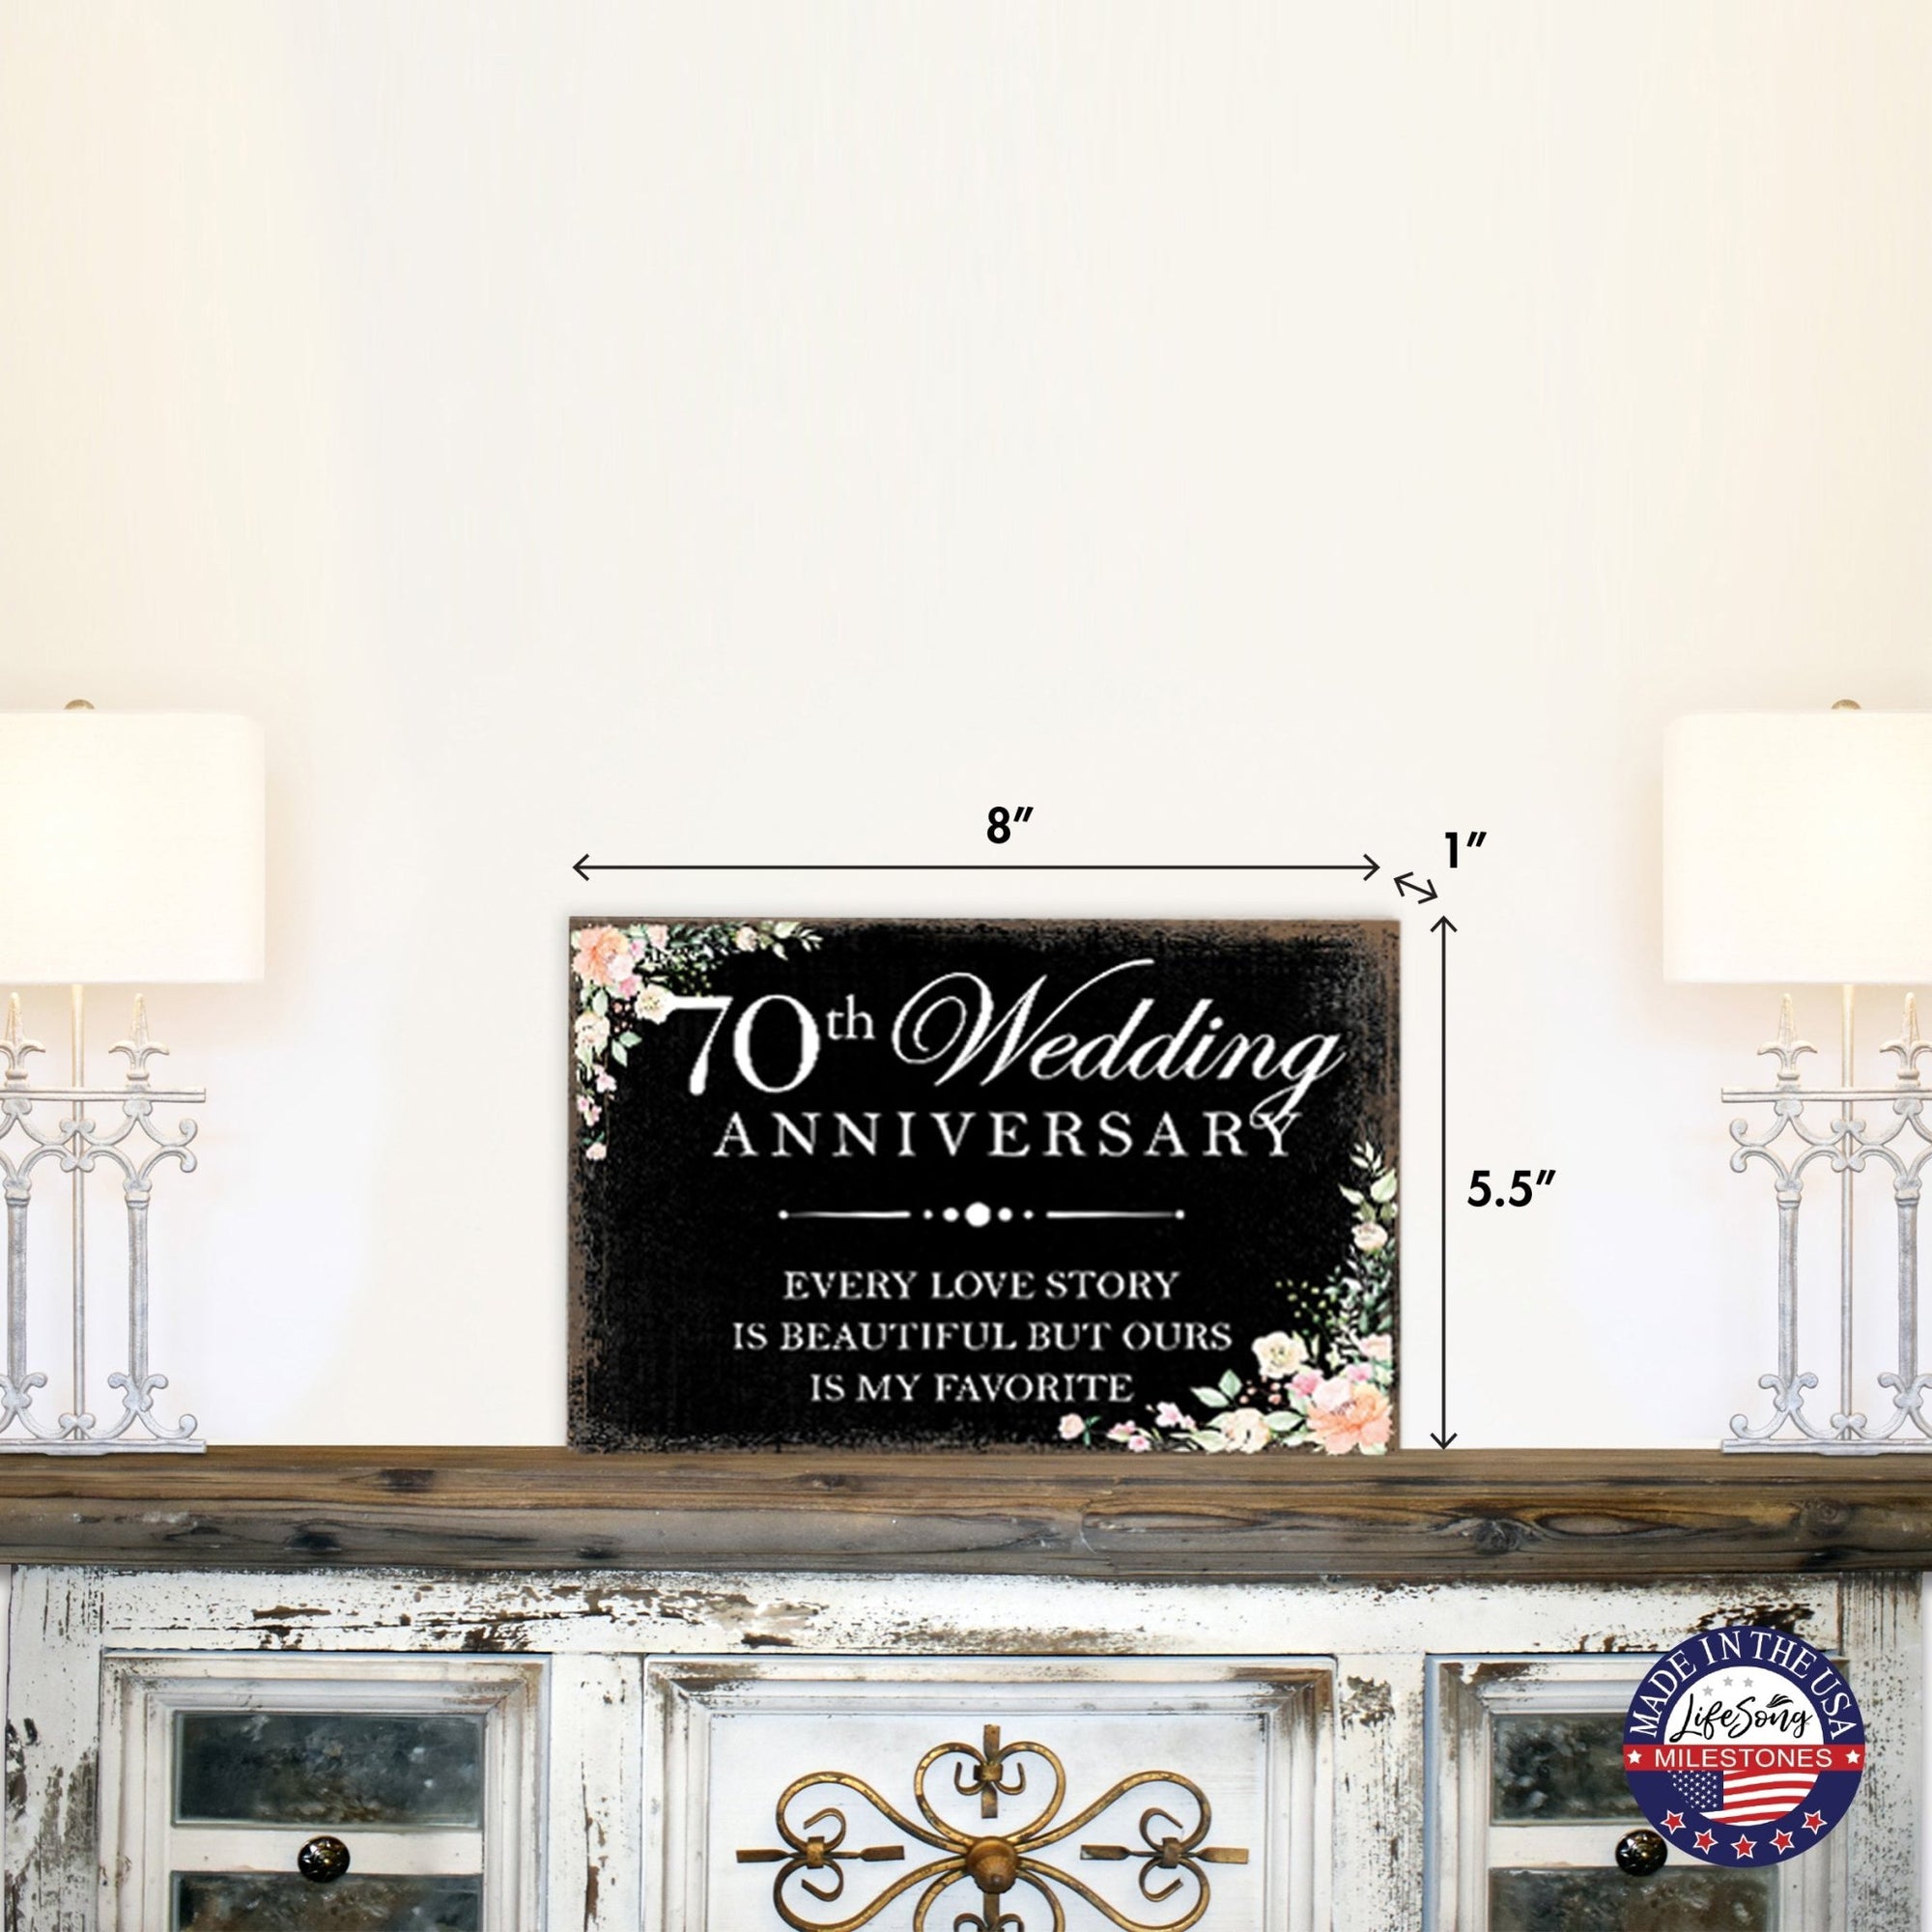 70th Wedding Anniversary Unique Shelf Decor and Tabletop Signs Gift for Couples - Every Love Story - LifeSong Milestones